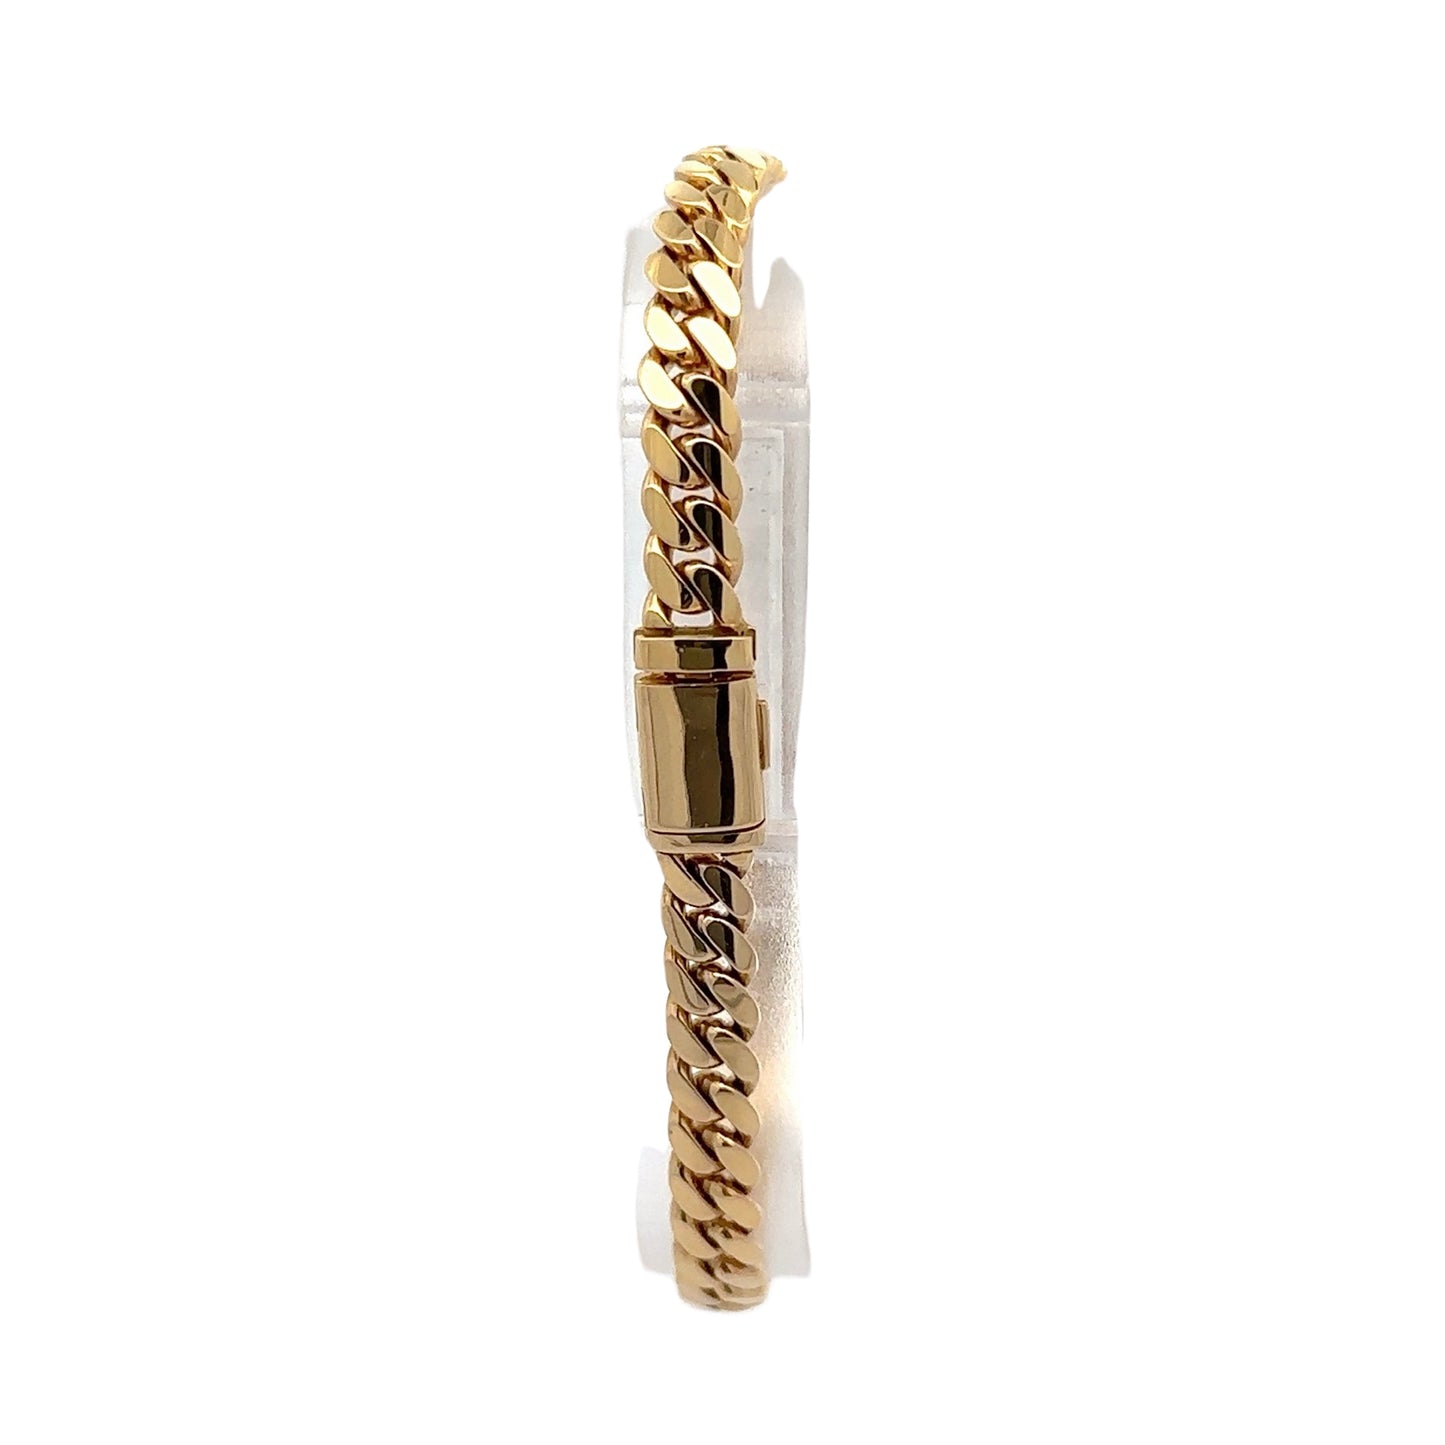 Back of yellow gold Miami Cuban Link bracelet with box clasp